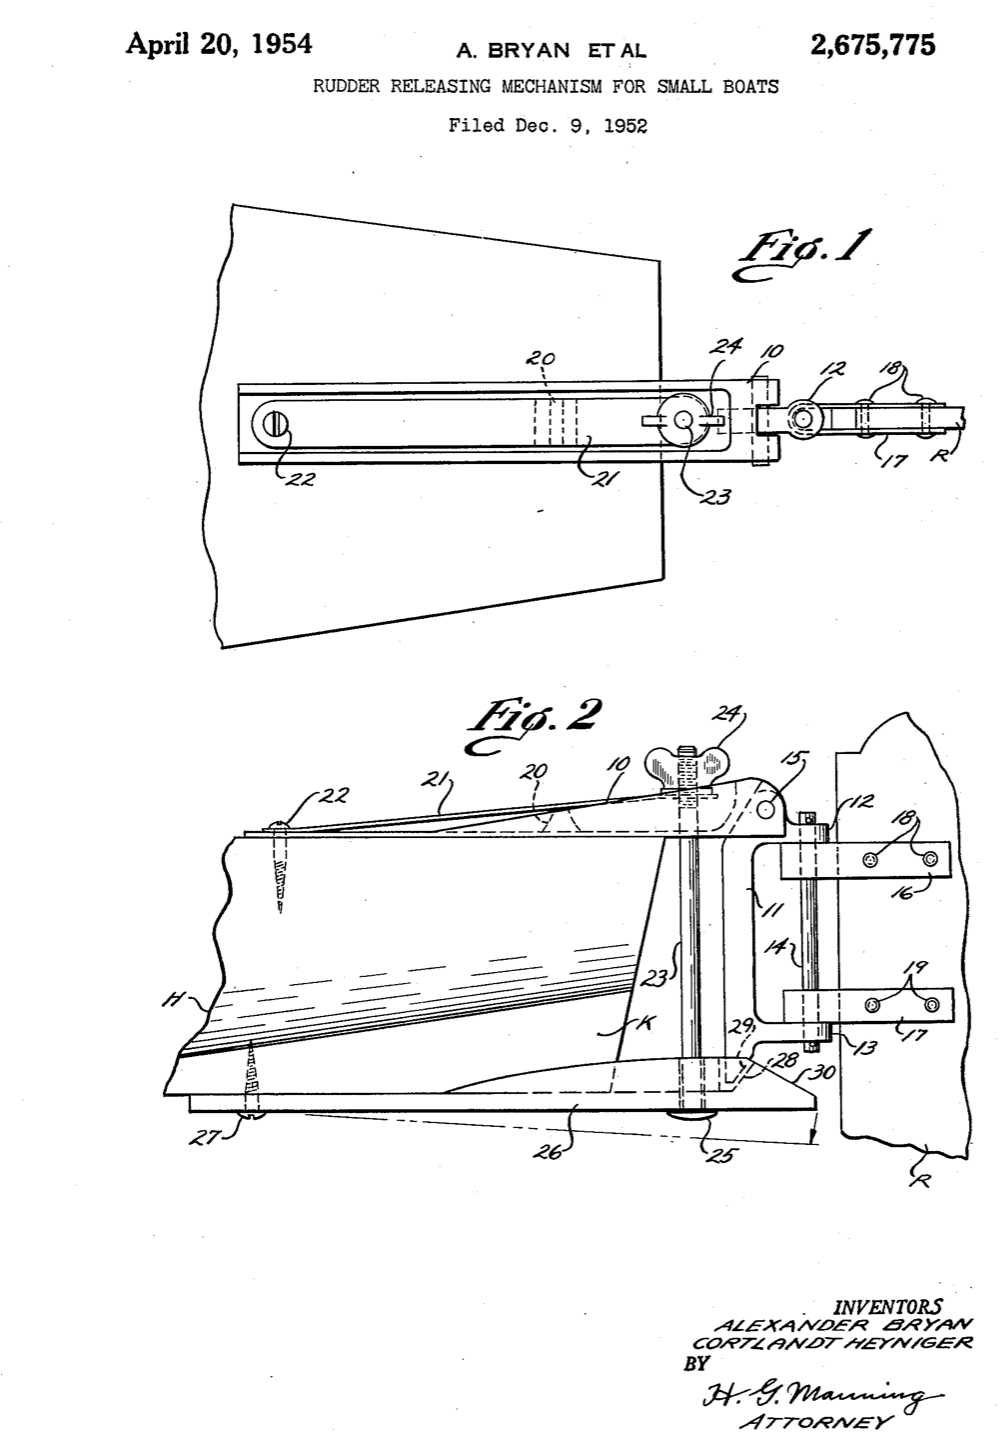 Alcort Rudder Releasing Mechanism Patent page 1.png